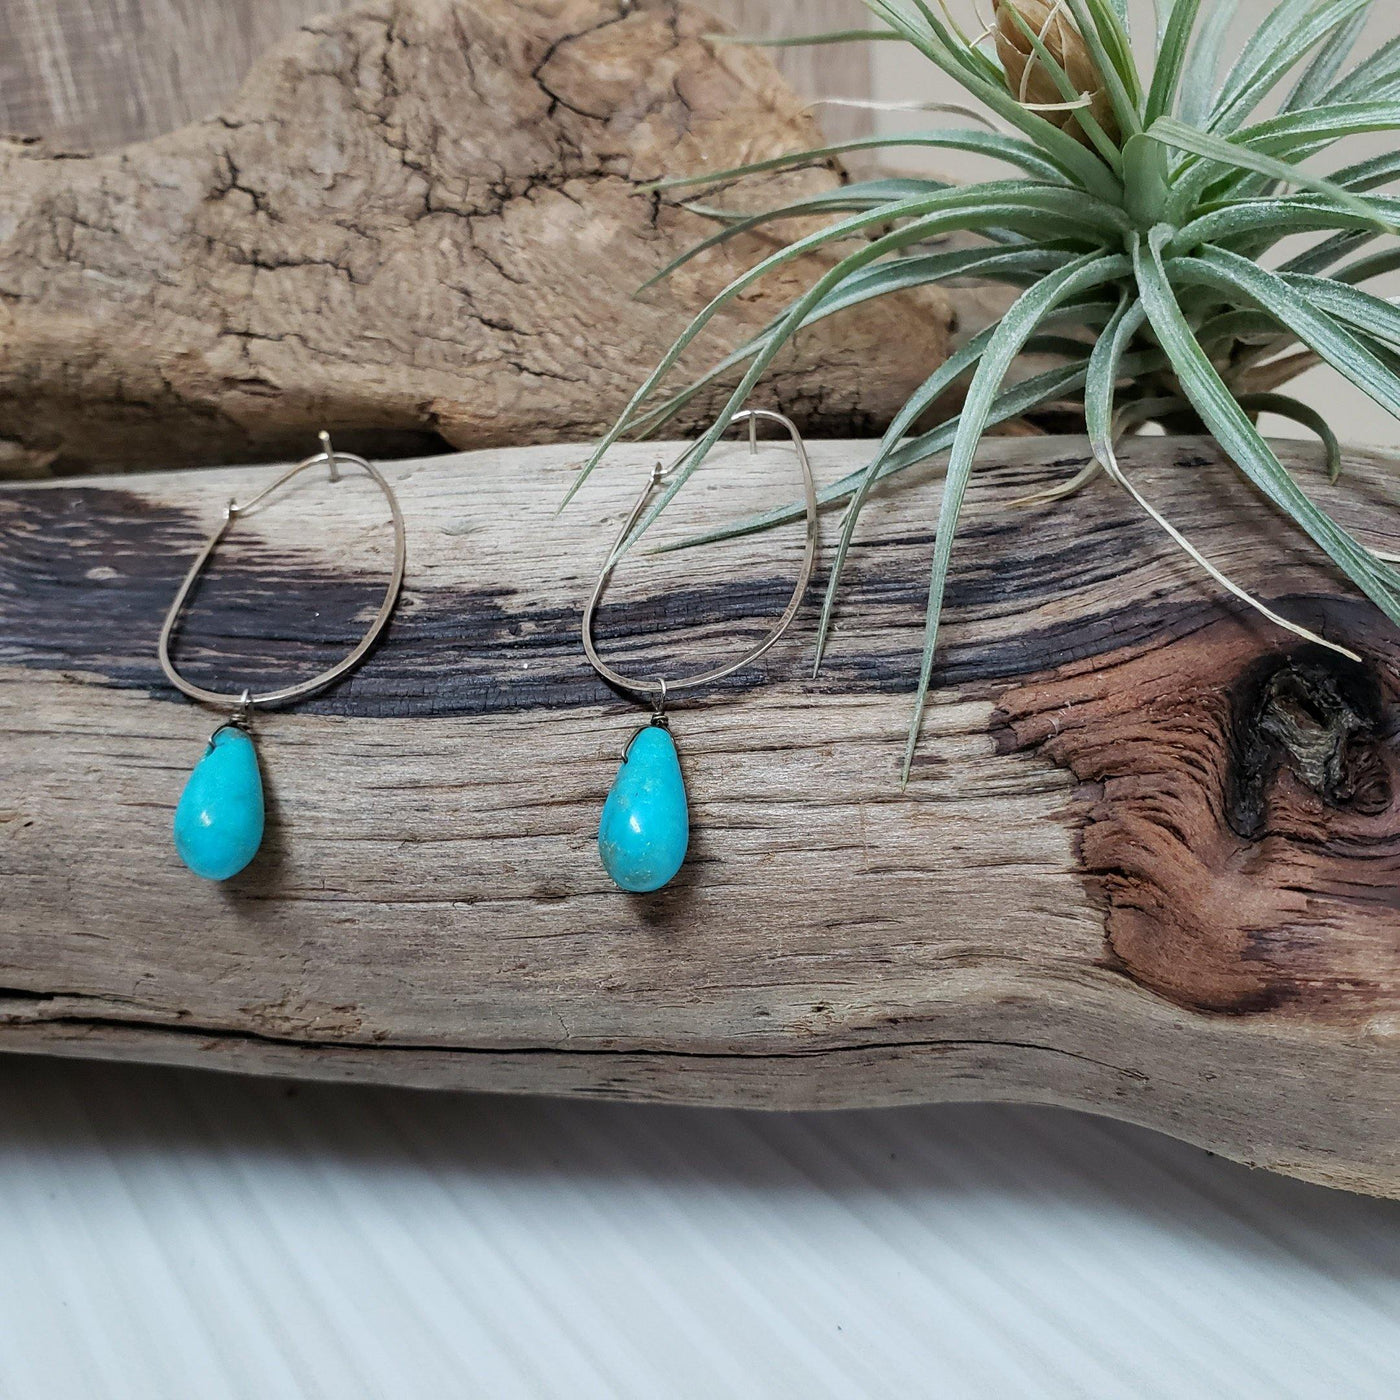 Turquoise and sterling silver earrings - LB Designs